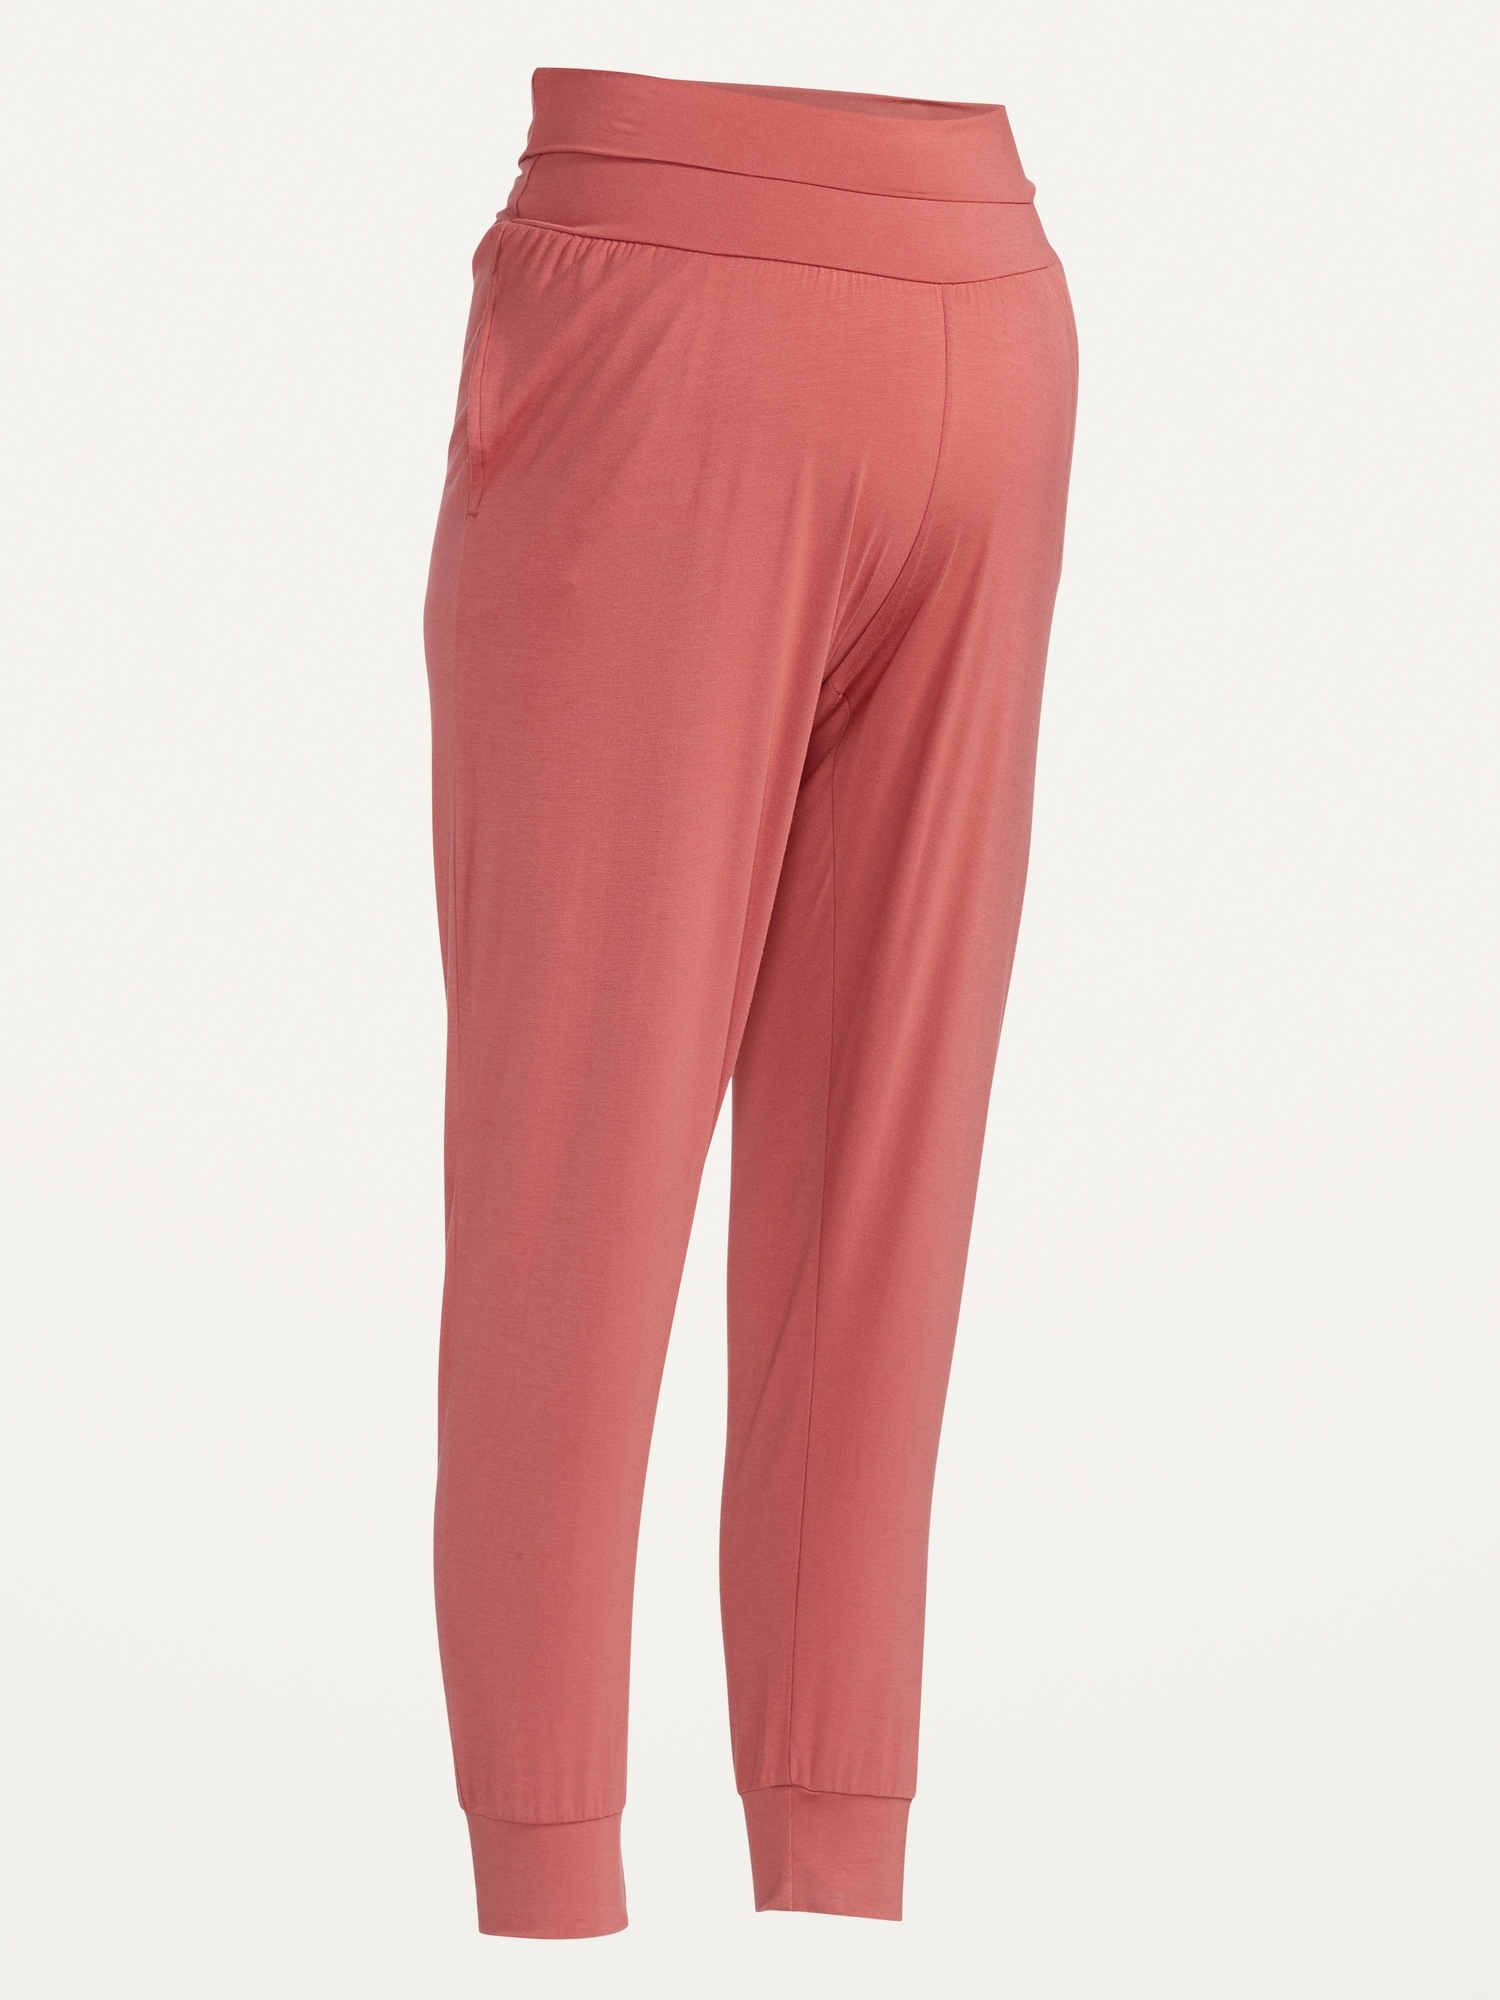 Kindred Bravely Everyday Maternity Joggers/Lounge Pants for Women  (Heathered Granite, X-Small) at  Women's Clothing store